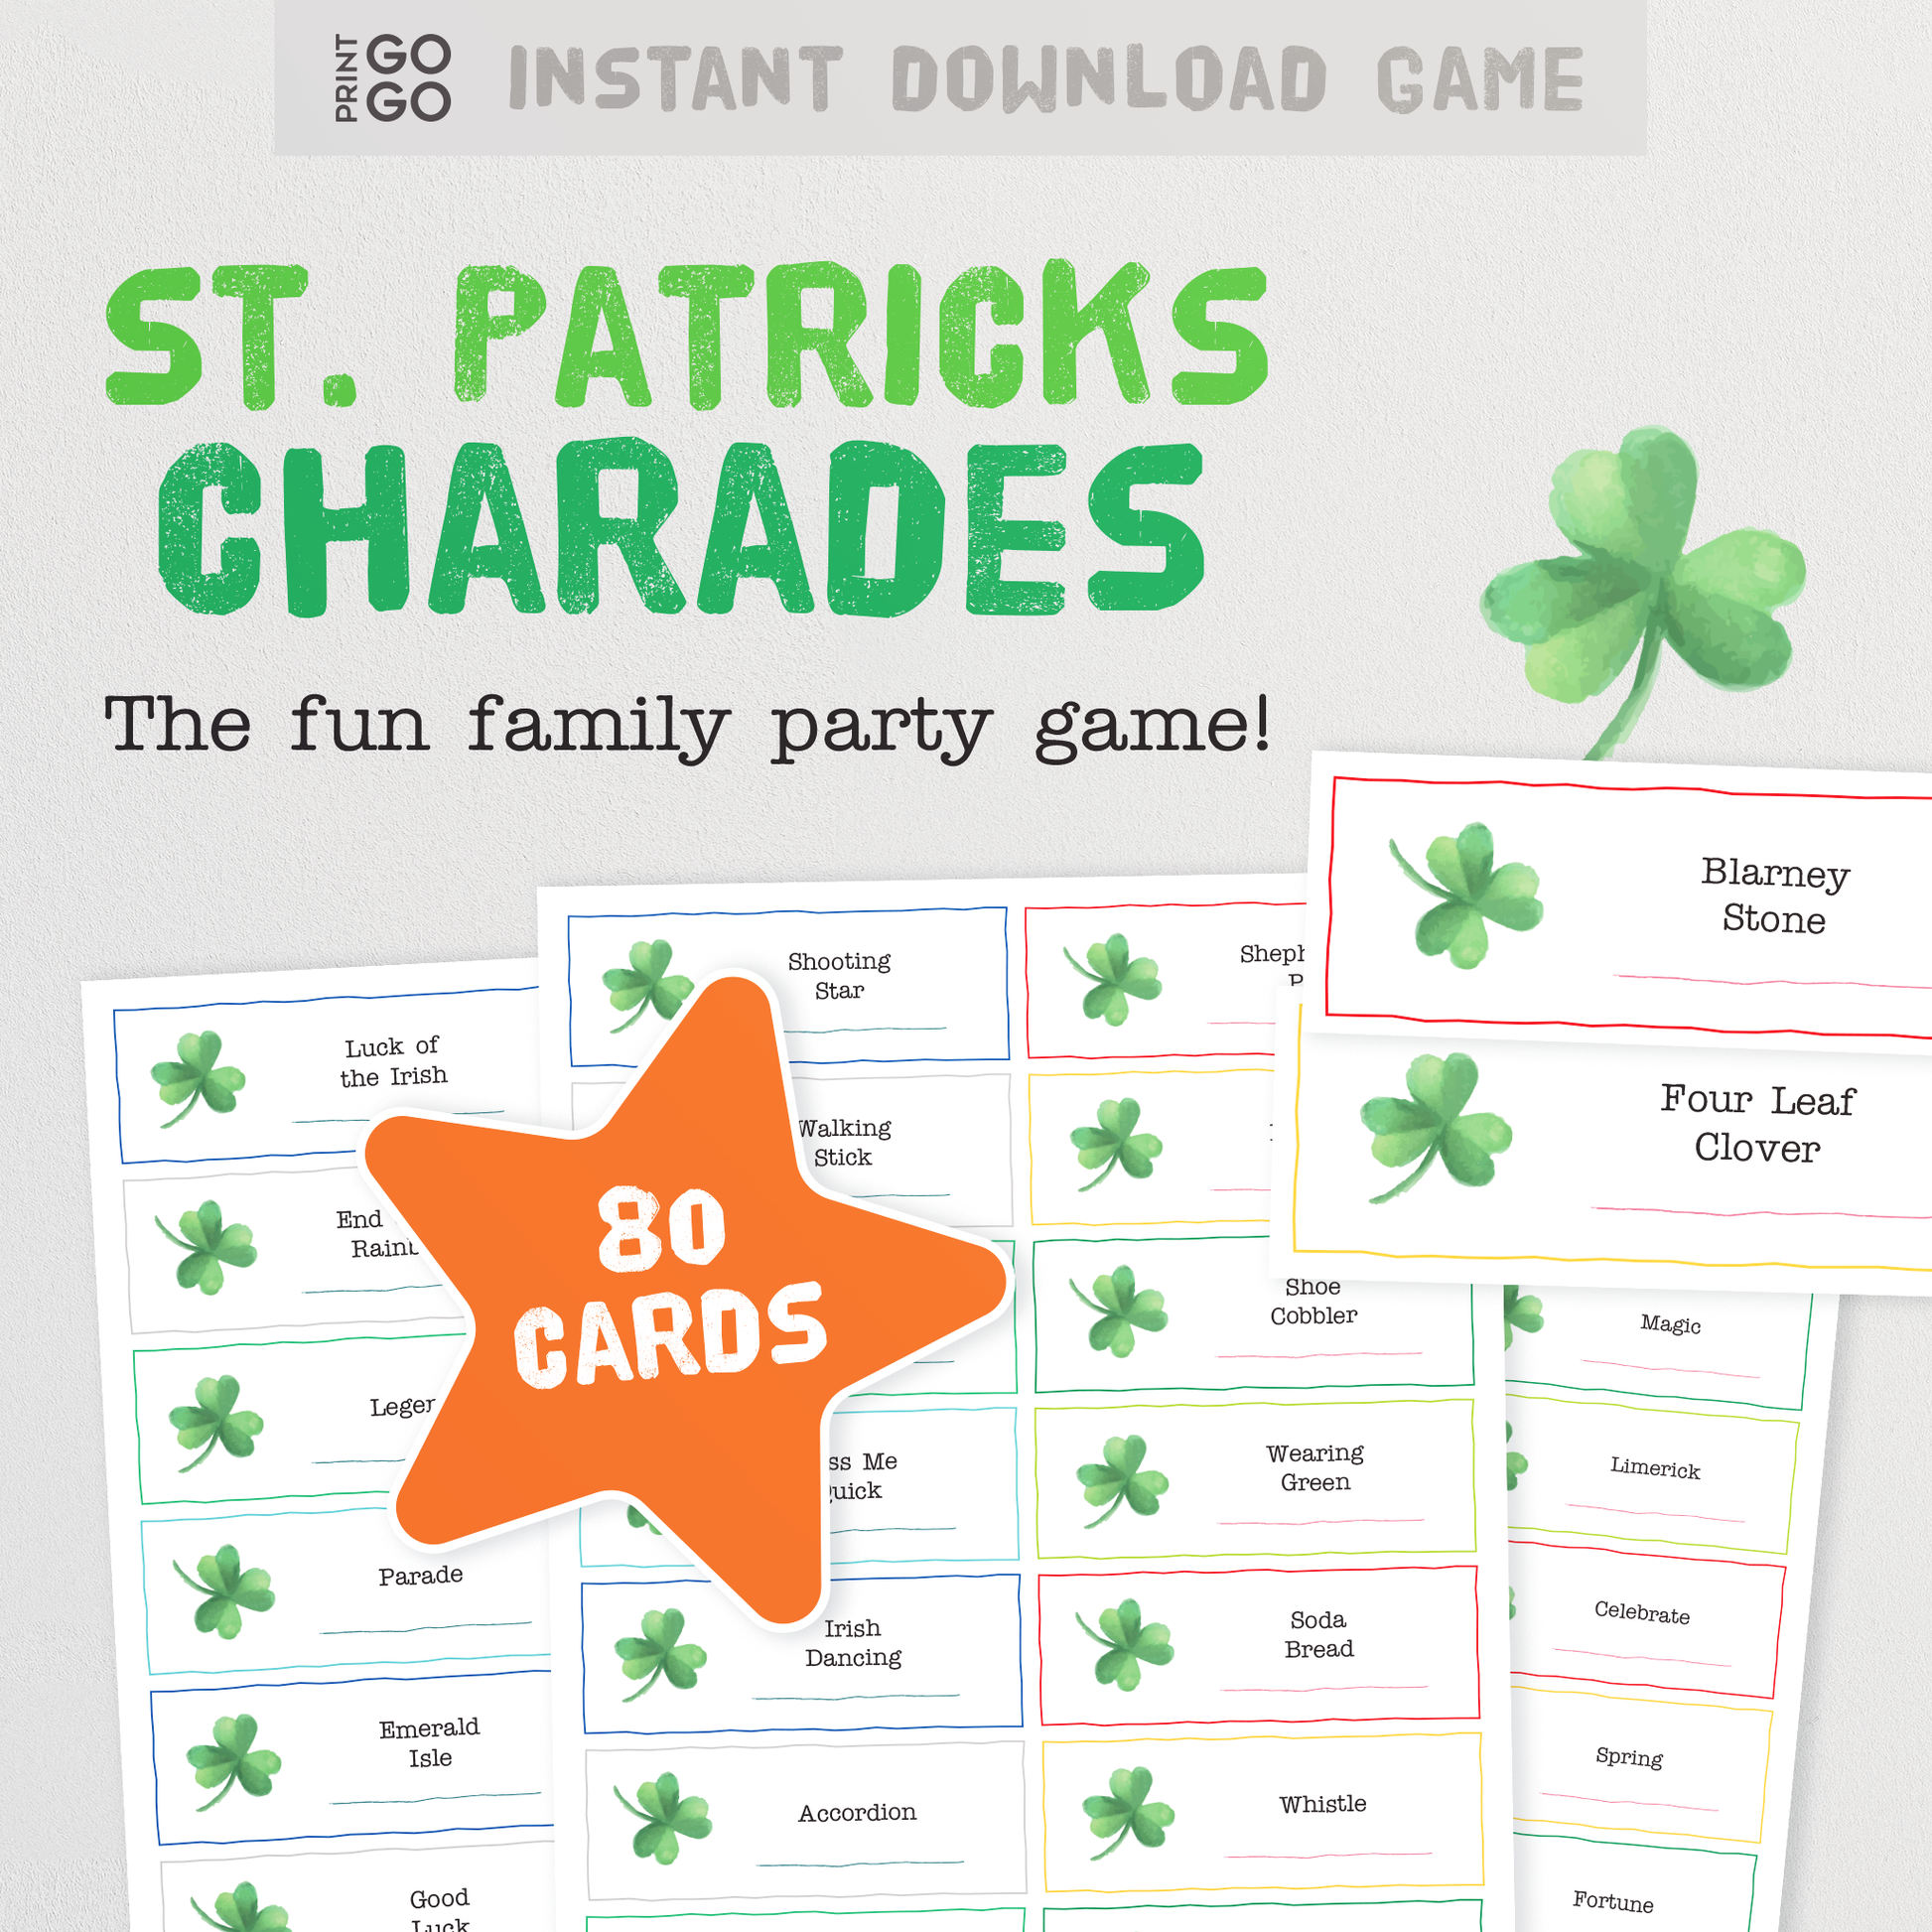 St. Patrick's Day Charades - The Fun Family Party Game of Acting Out